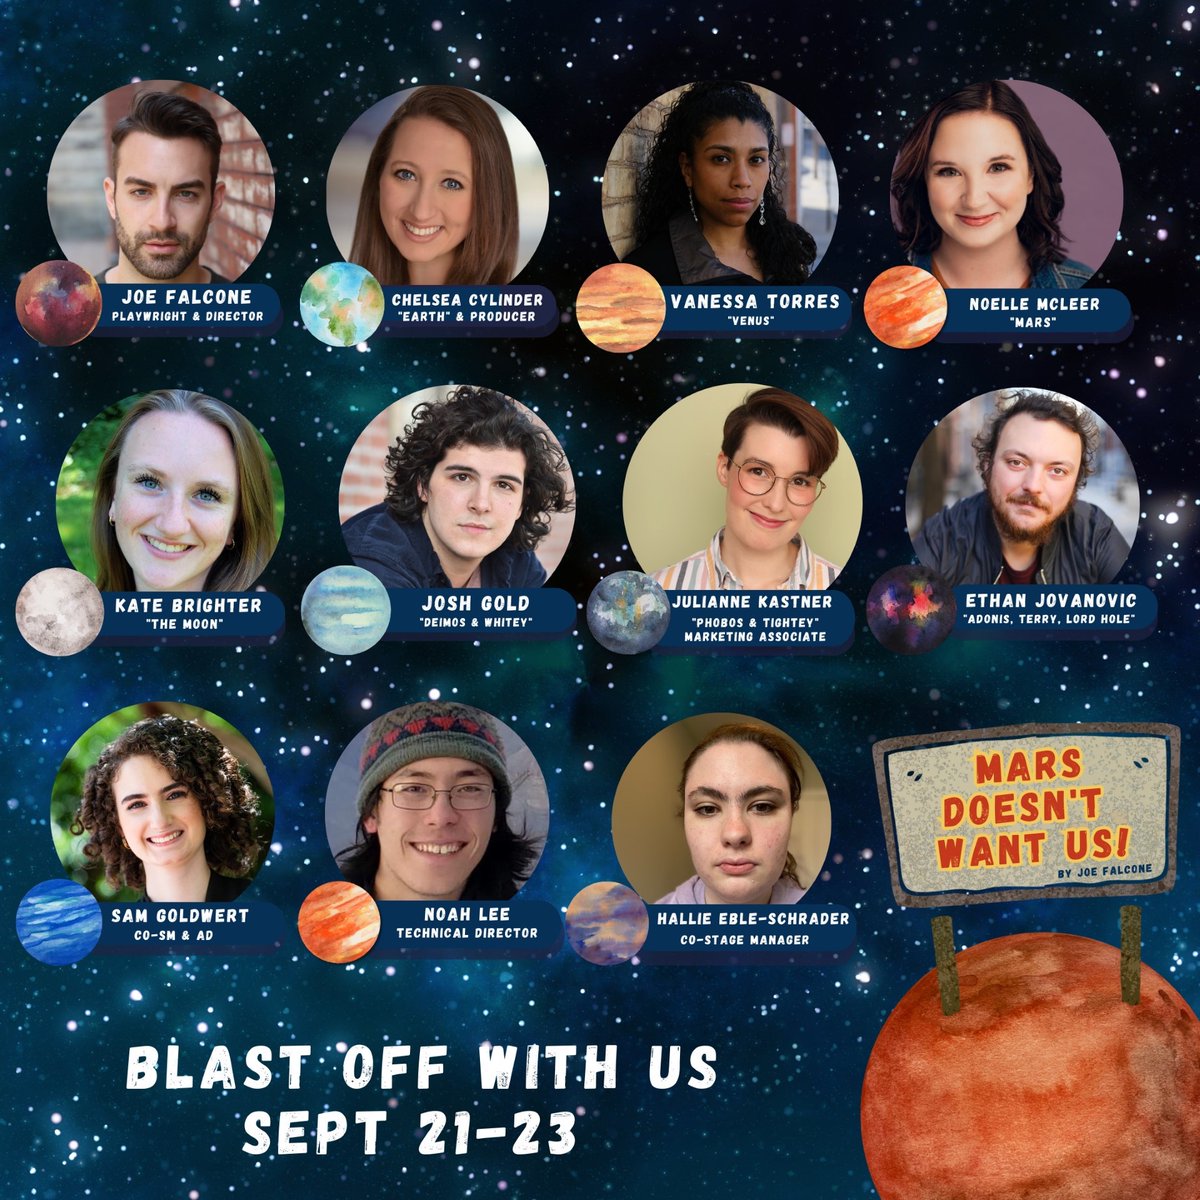 Beck's is proud to sponsor 'MARS DOESN'T WANT US' premiering tomorrow at the Arden Theater! Tickets: phillyfringe.org/events/mars-do…
#philadelphia #phillyfringe #phillytalent #phillytheater #liveperformance #phillyeats #philadelphiafringefestival #phillyfoodies #discoverphl #eaterphilly